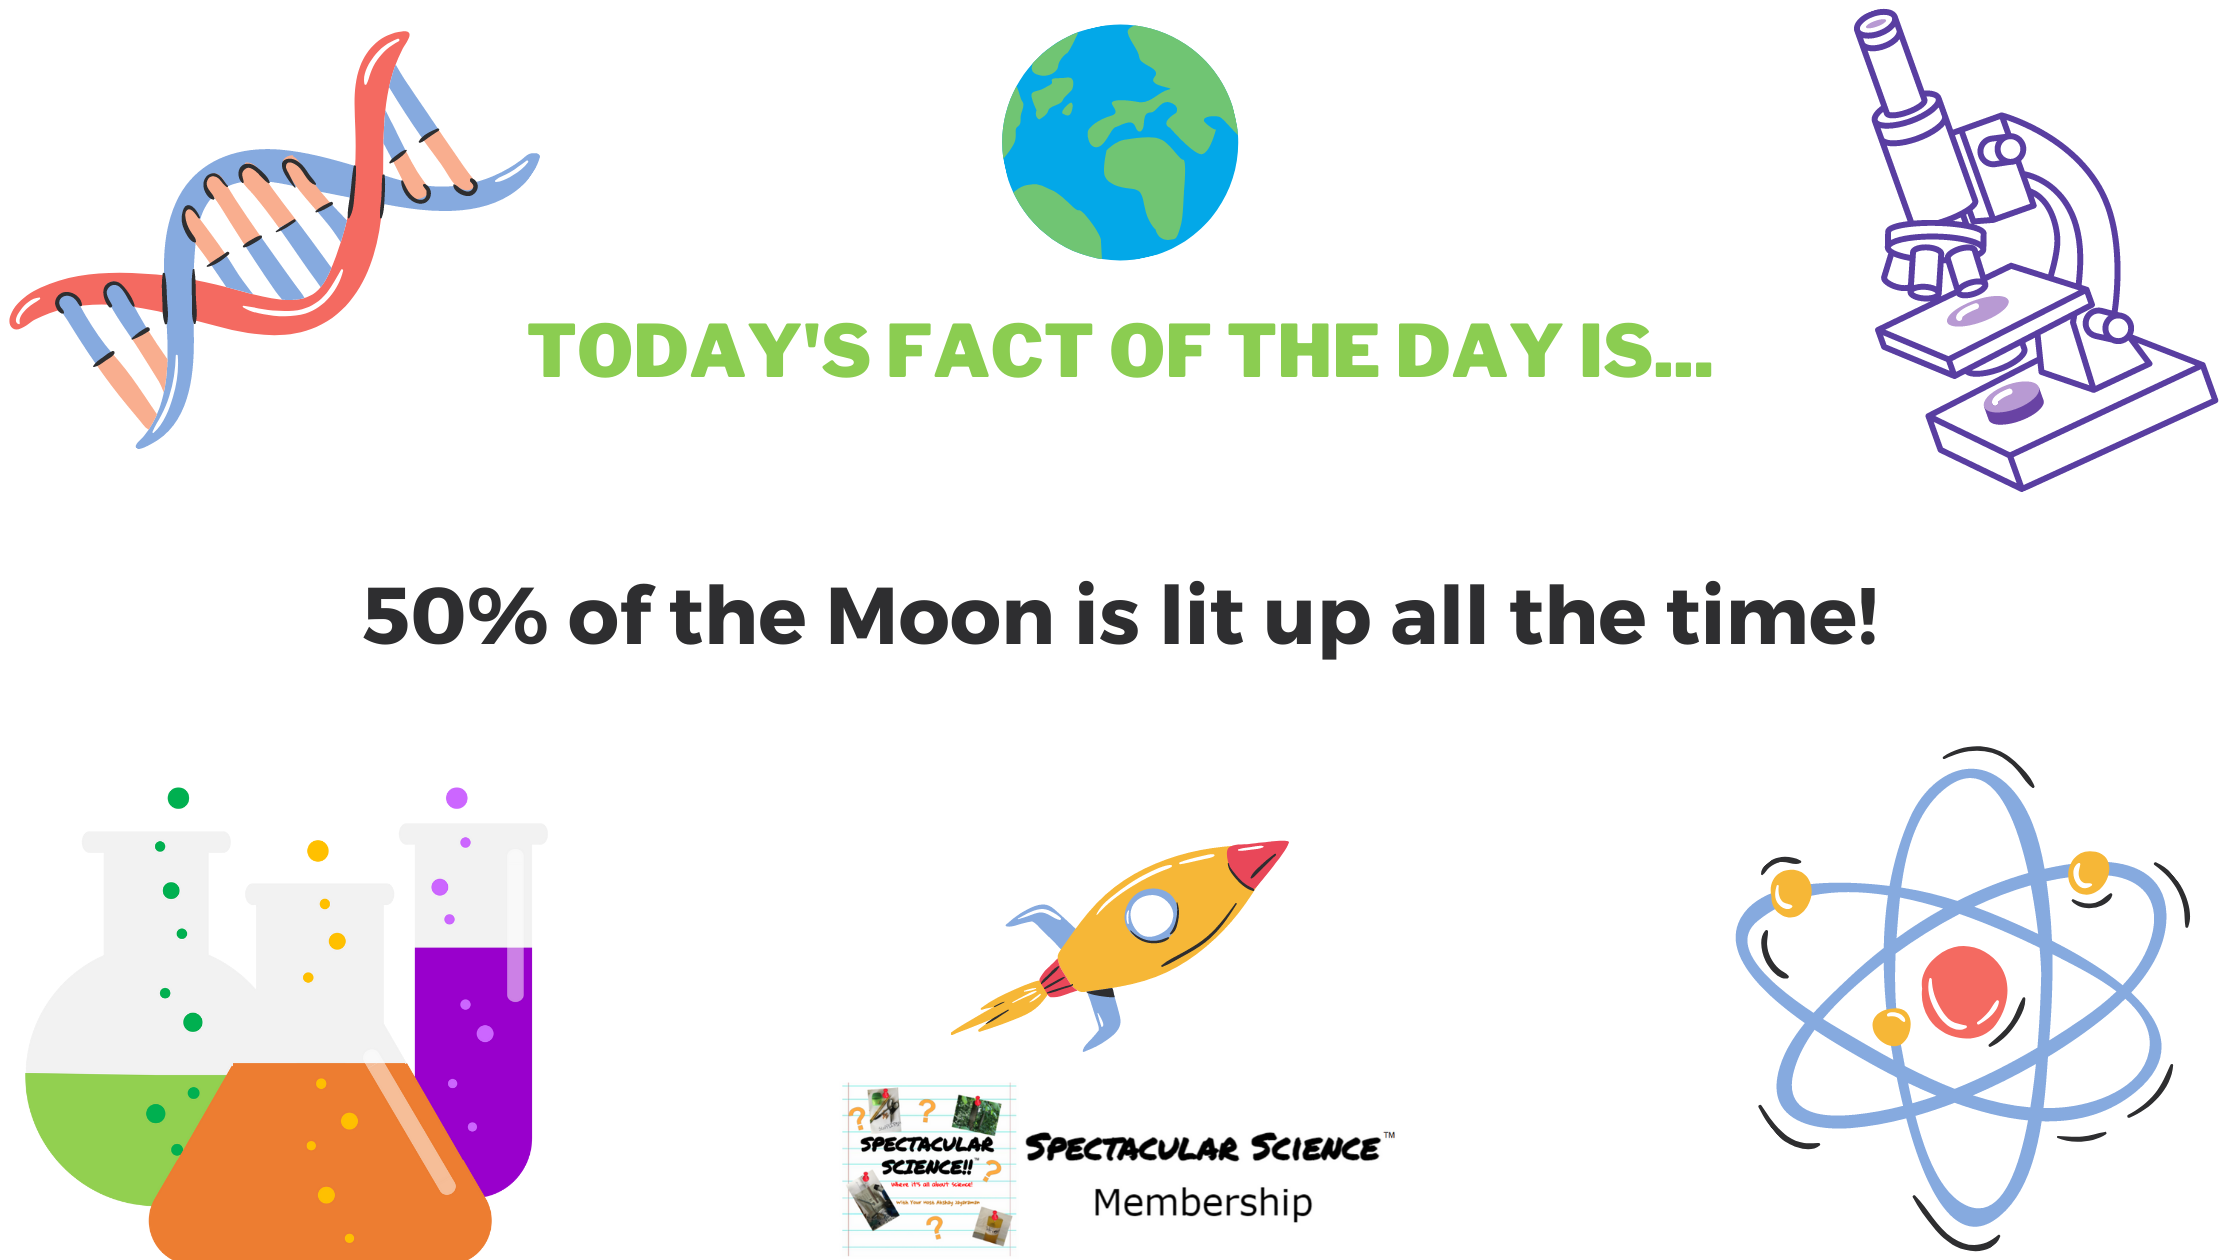 Fact of the Day Image May 6th